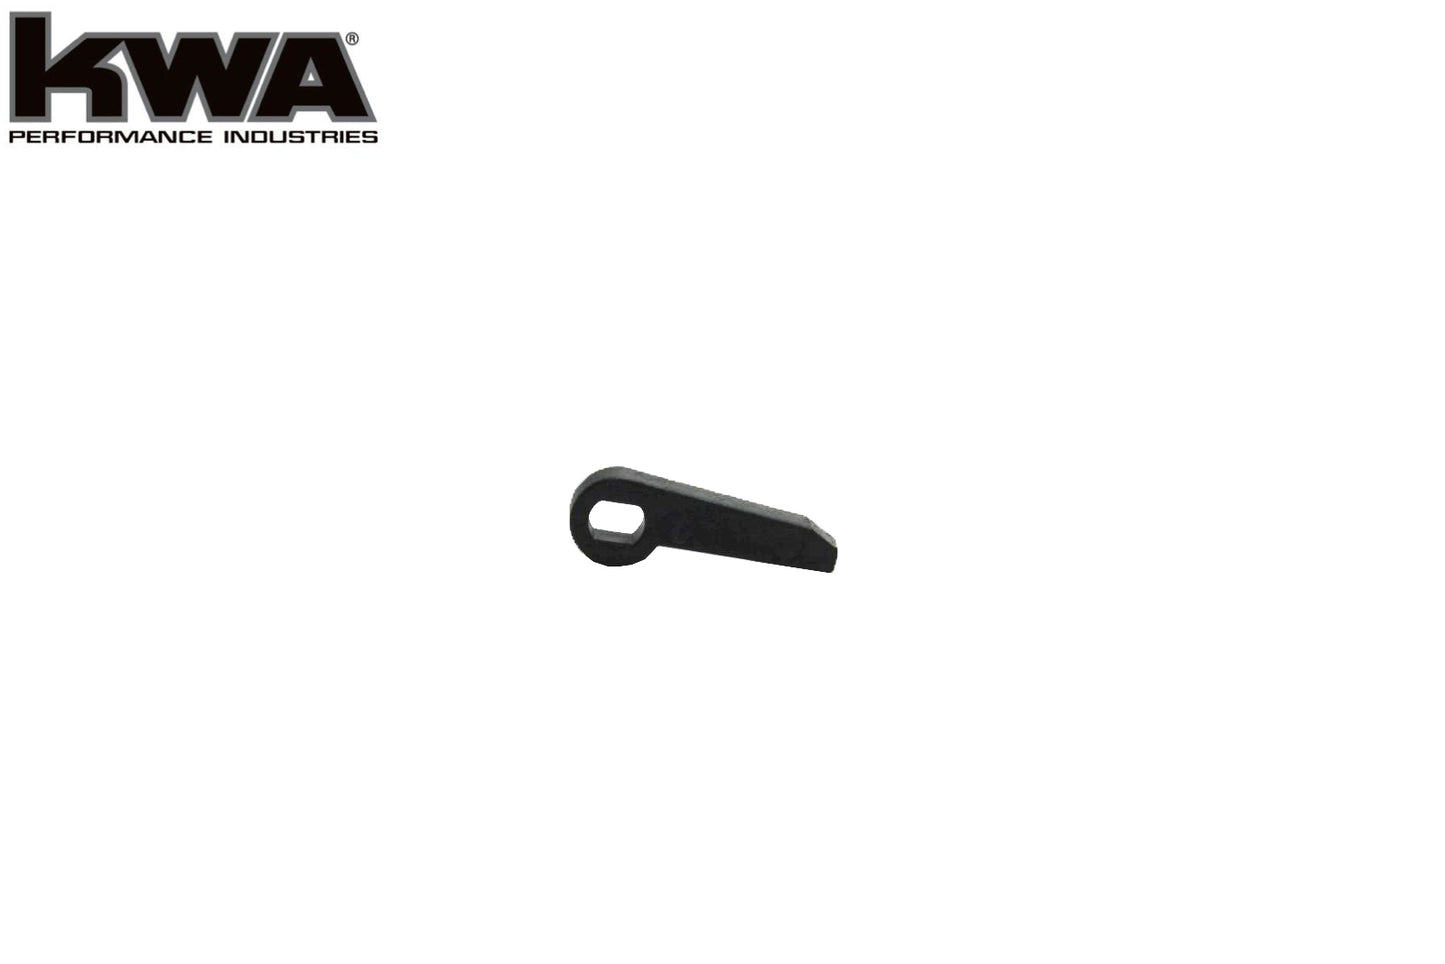 KWA Premium AEG Gearbox Safety Lever Bar Replacement